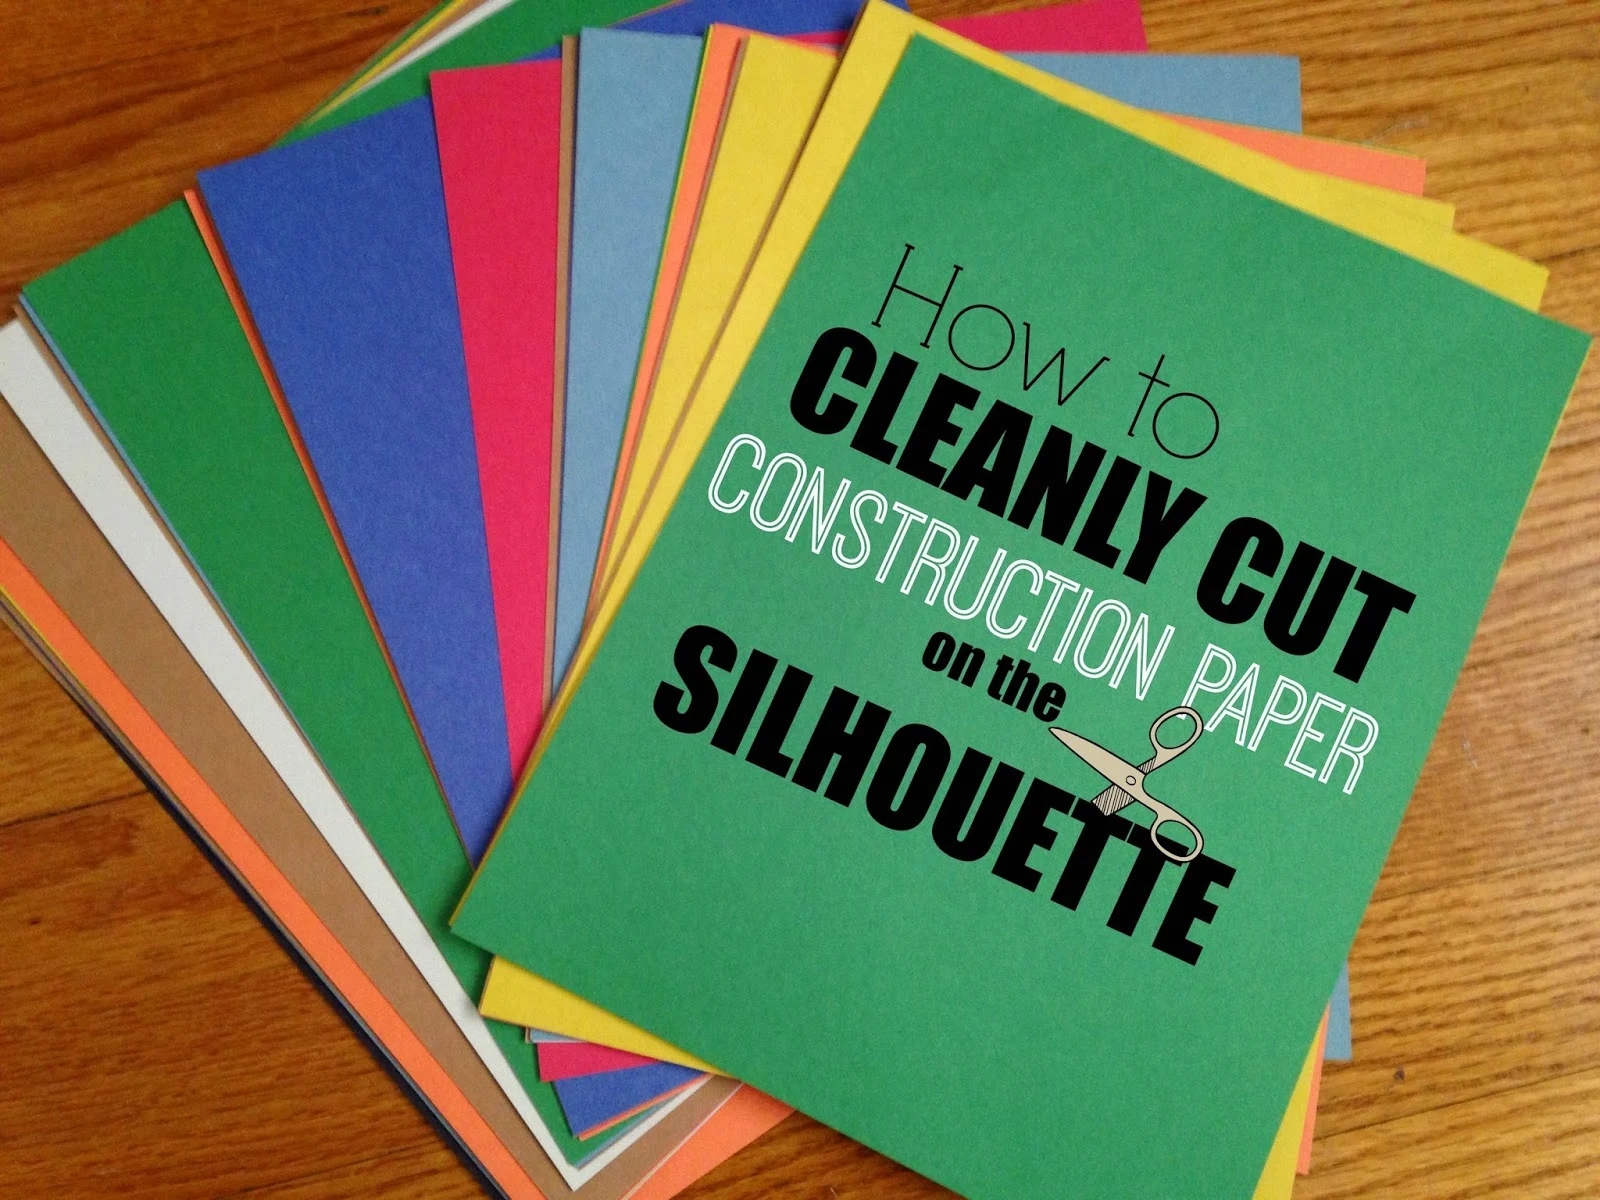 Silhouette Cameo, construction paper, cleanly cutting, Silhouette tutorial